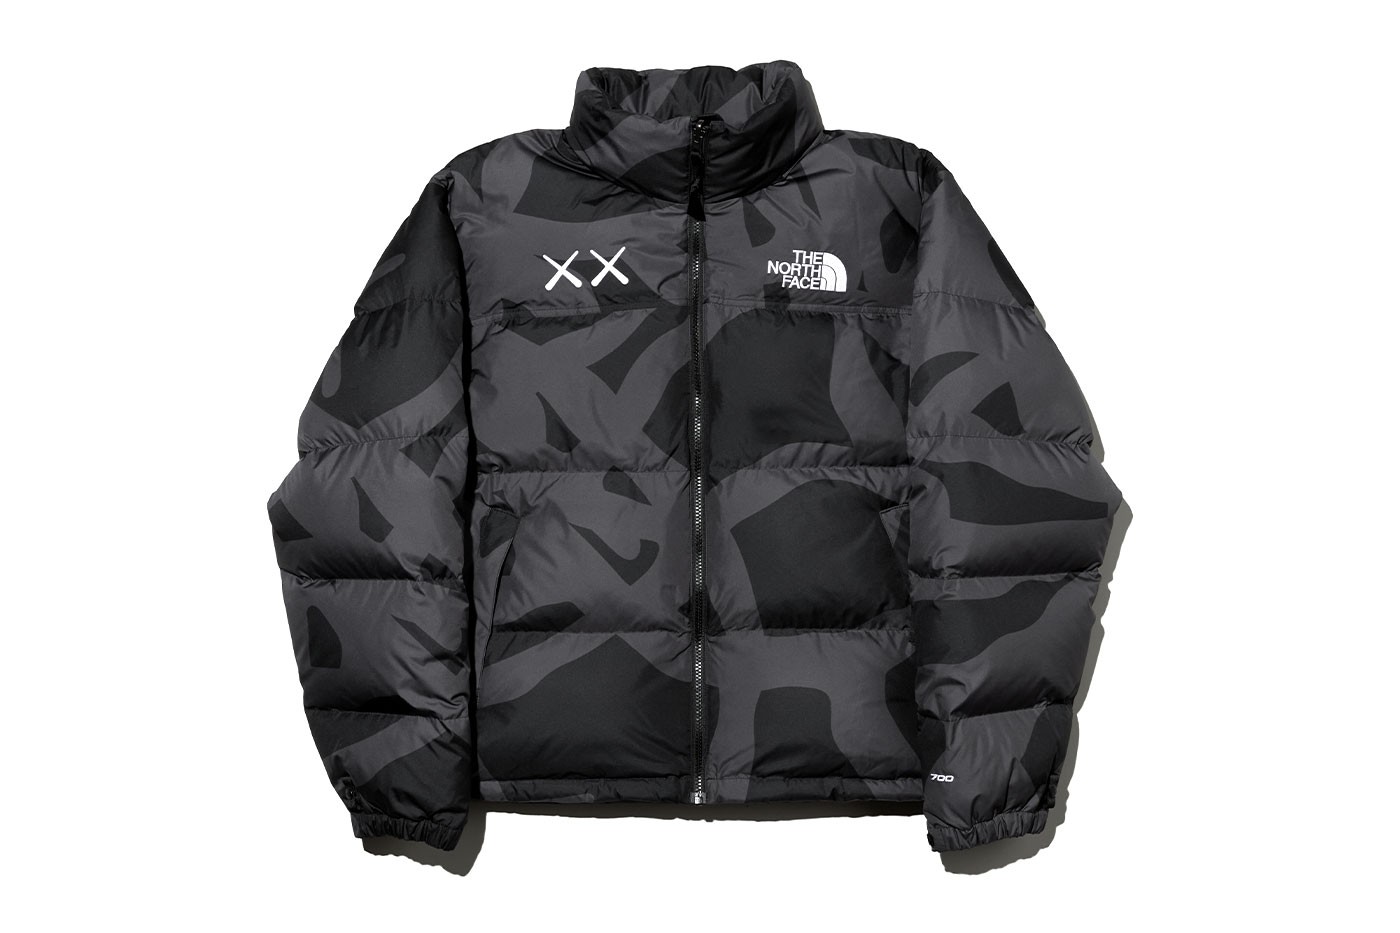 The North Face x KAWS Automne/Hiver 2022